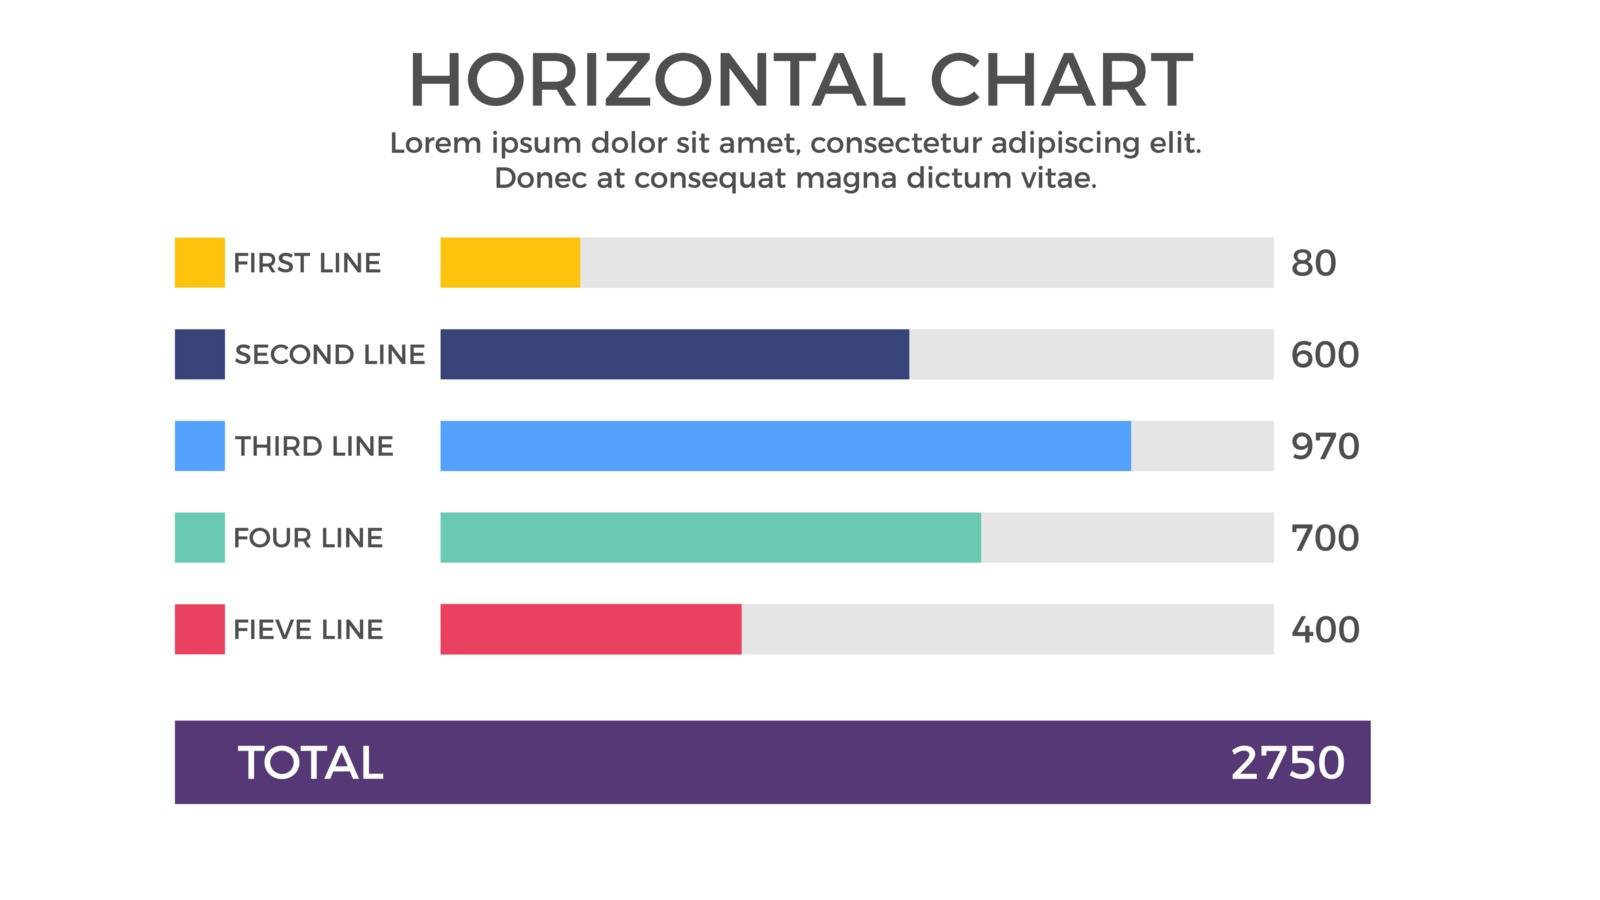 Horizontal Chart Infographic Element - Business Vector Illustration in Flat Design Style for Presentation, Booklet, Website, Presentation etc. Isolated on the White Background.